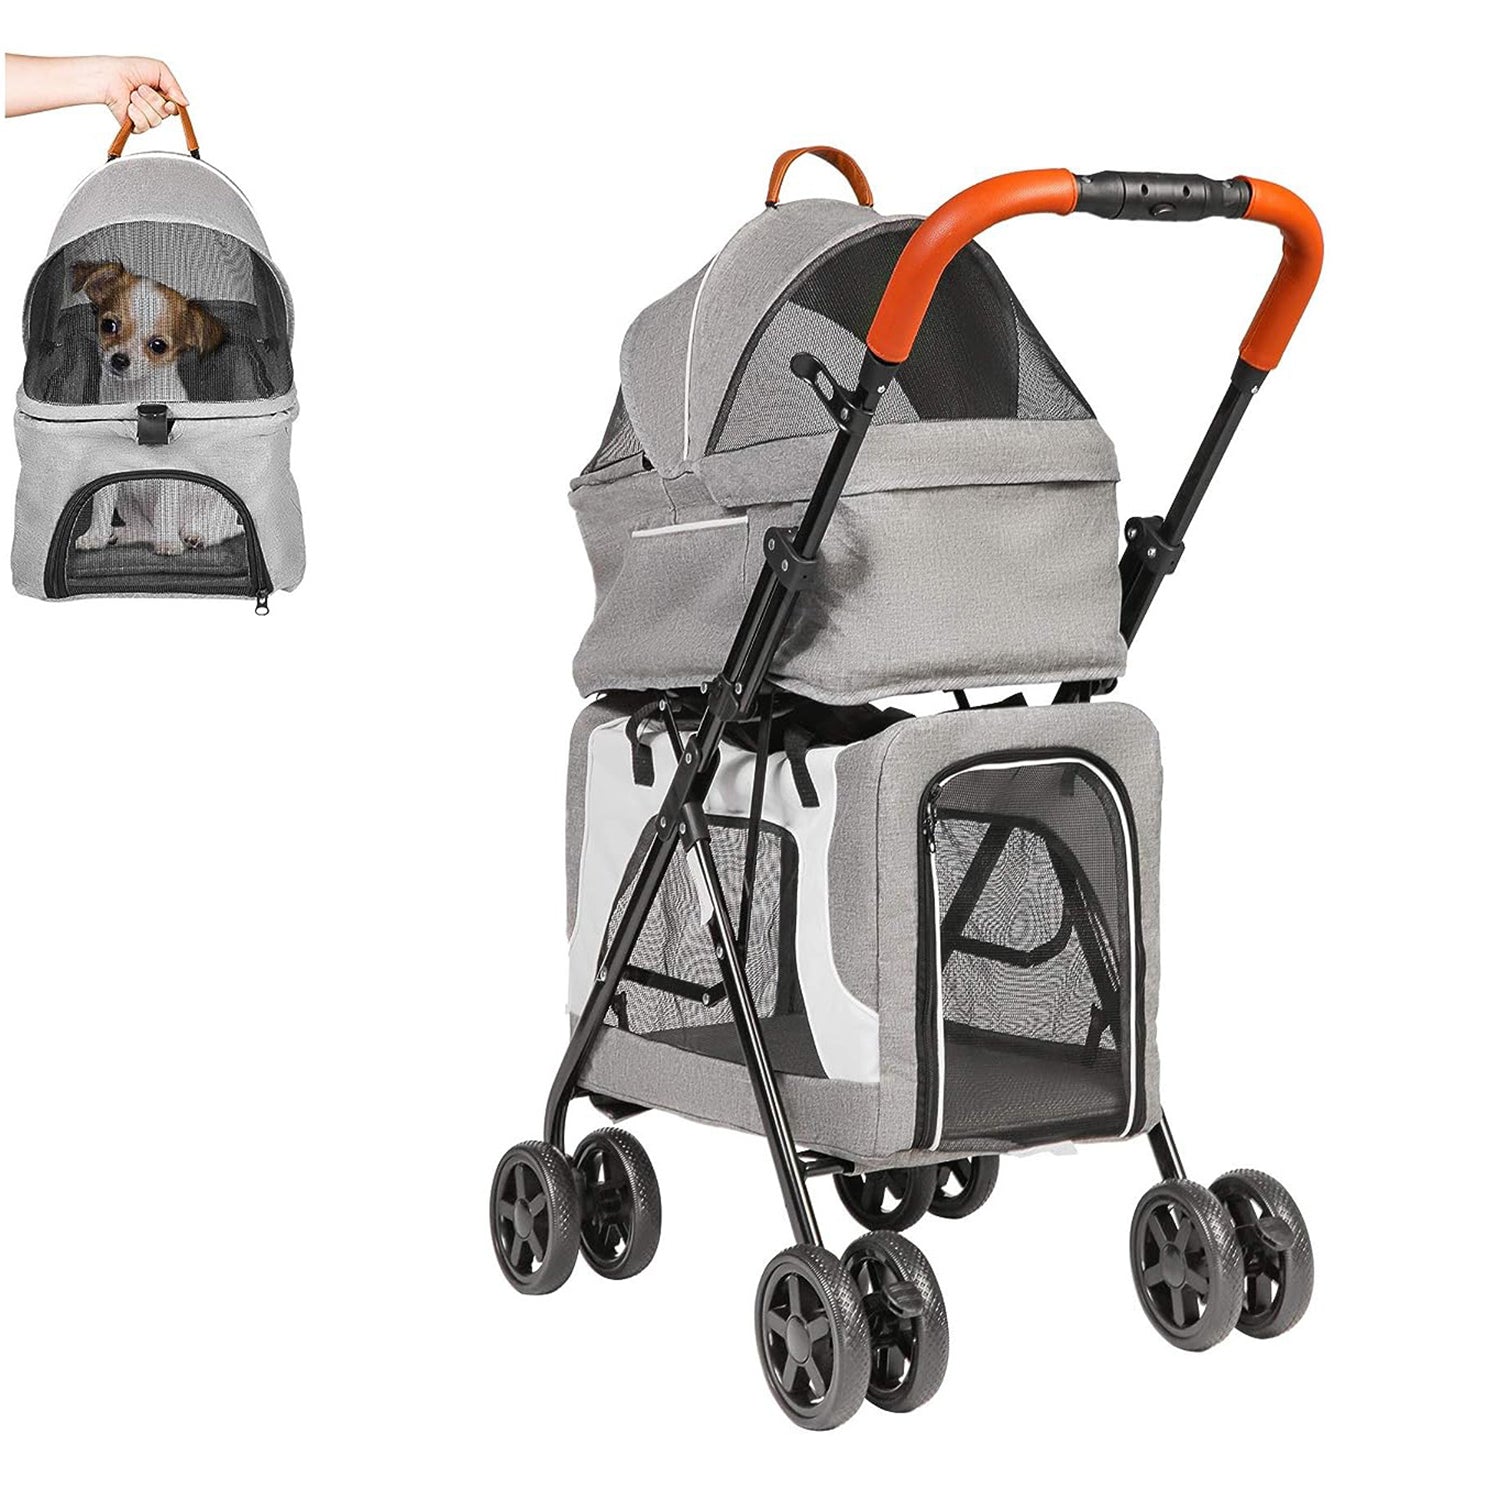 3 in 1 Double Seater Dog Stroller Pet Carrier with Detachable Carrier Dual Entry, Gray